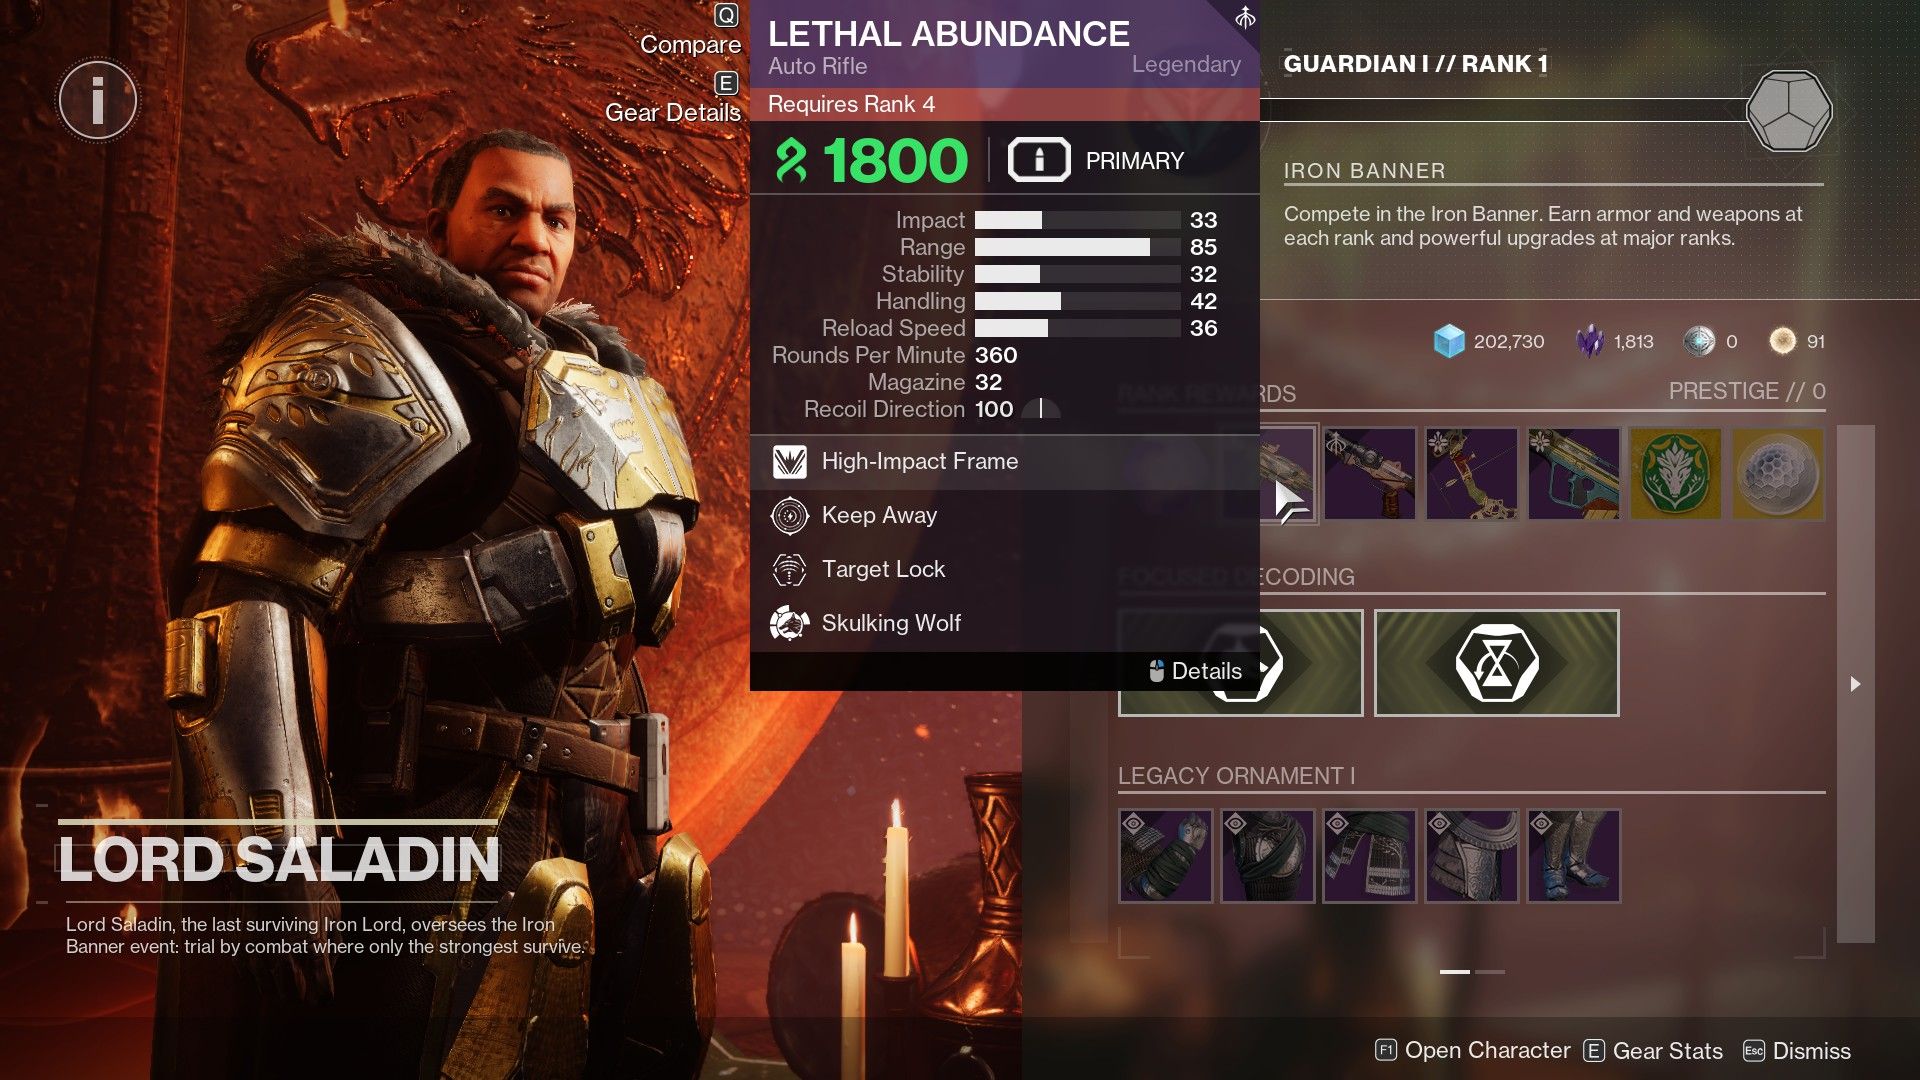 The Lethal Abundance roll from Lord Saladin in Destiny 2